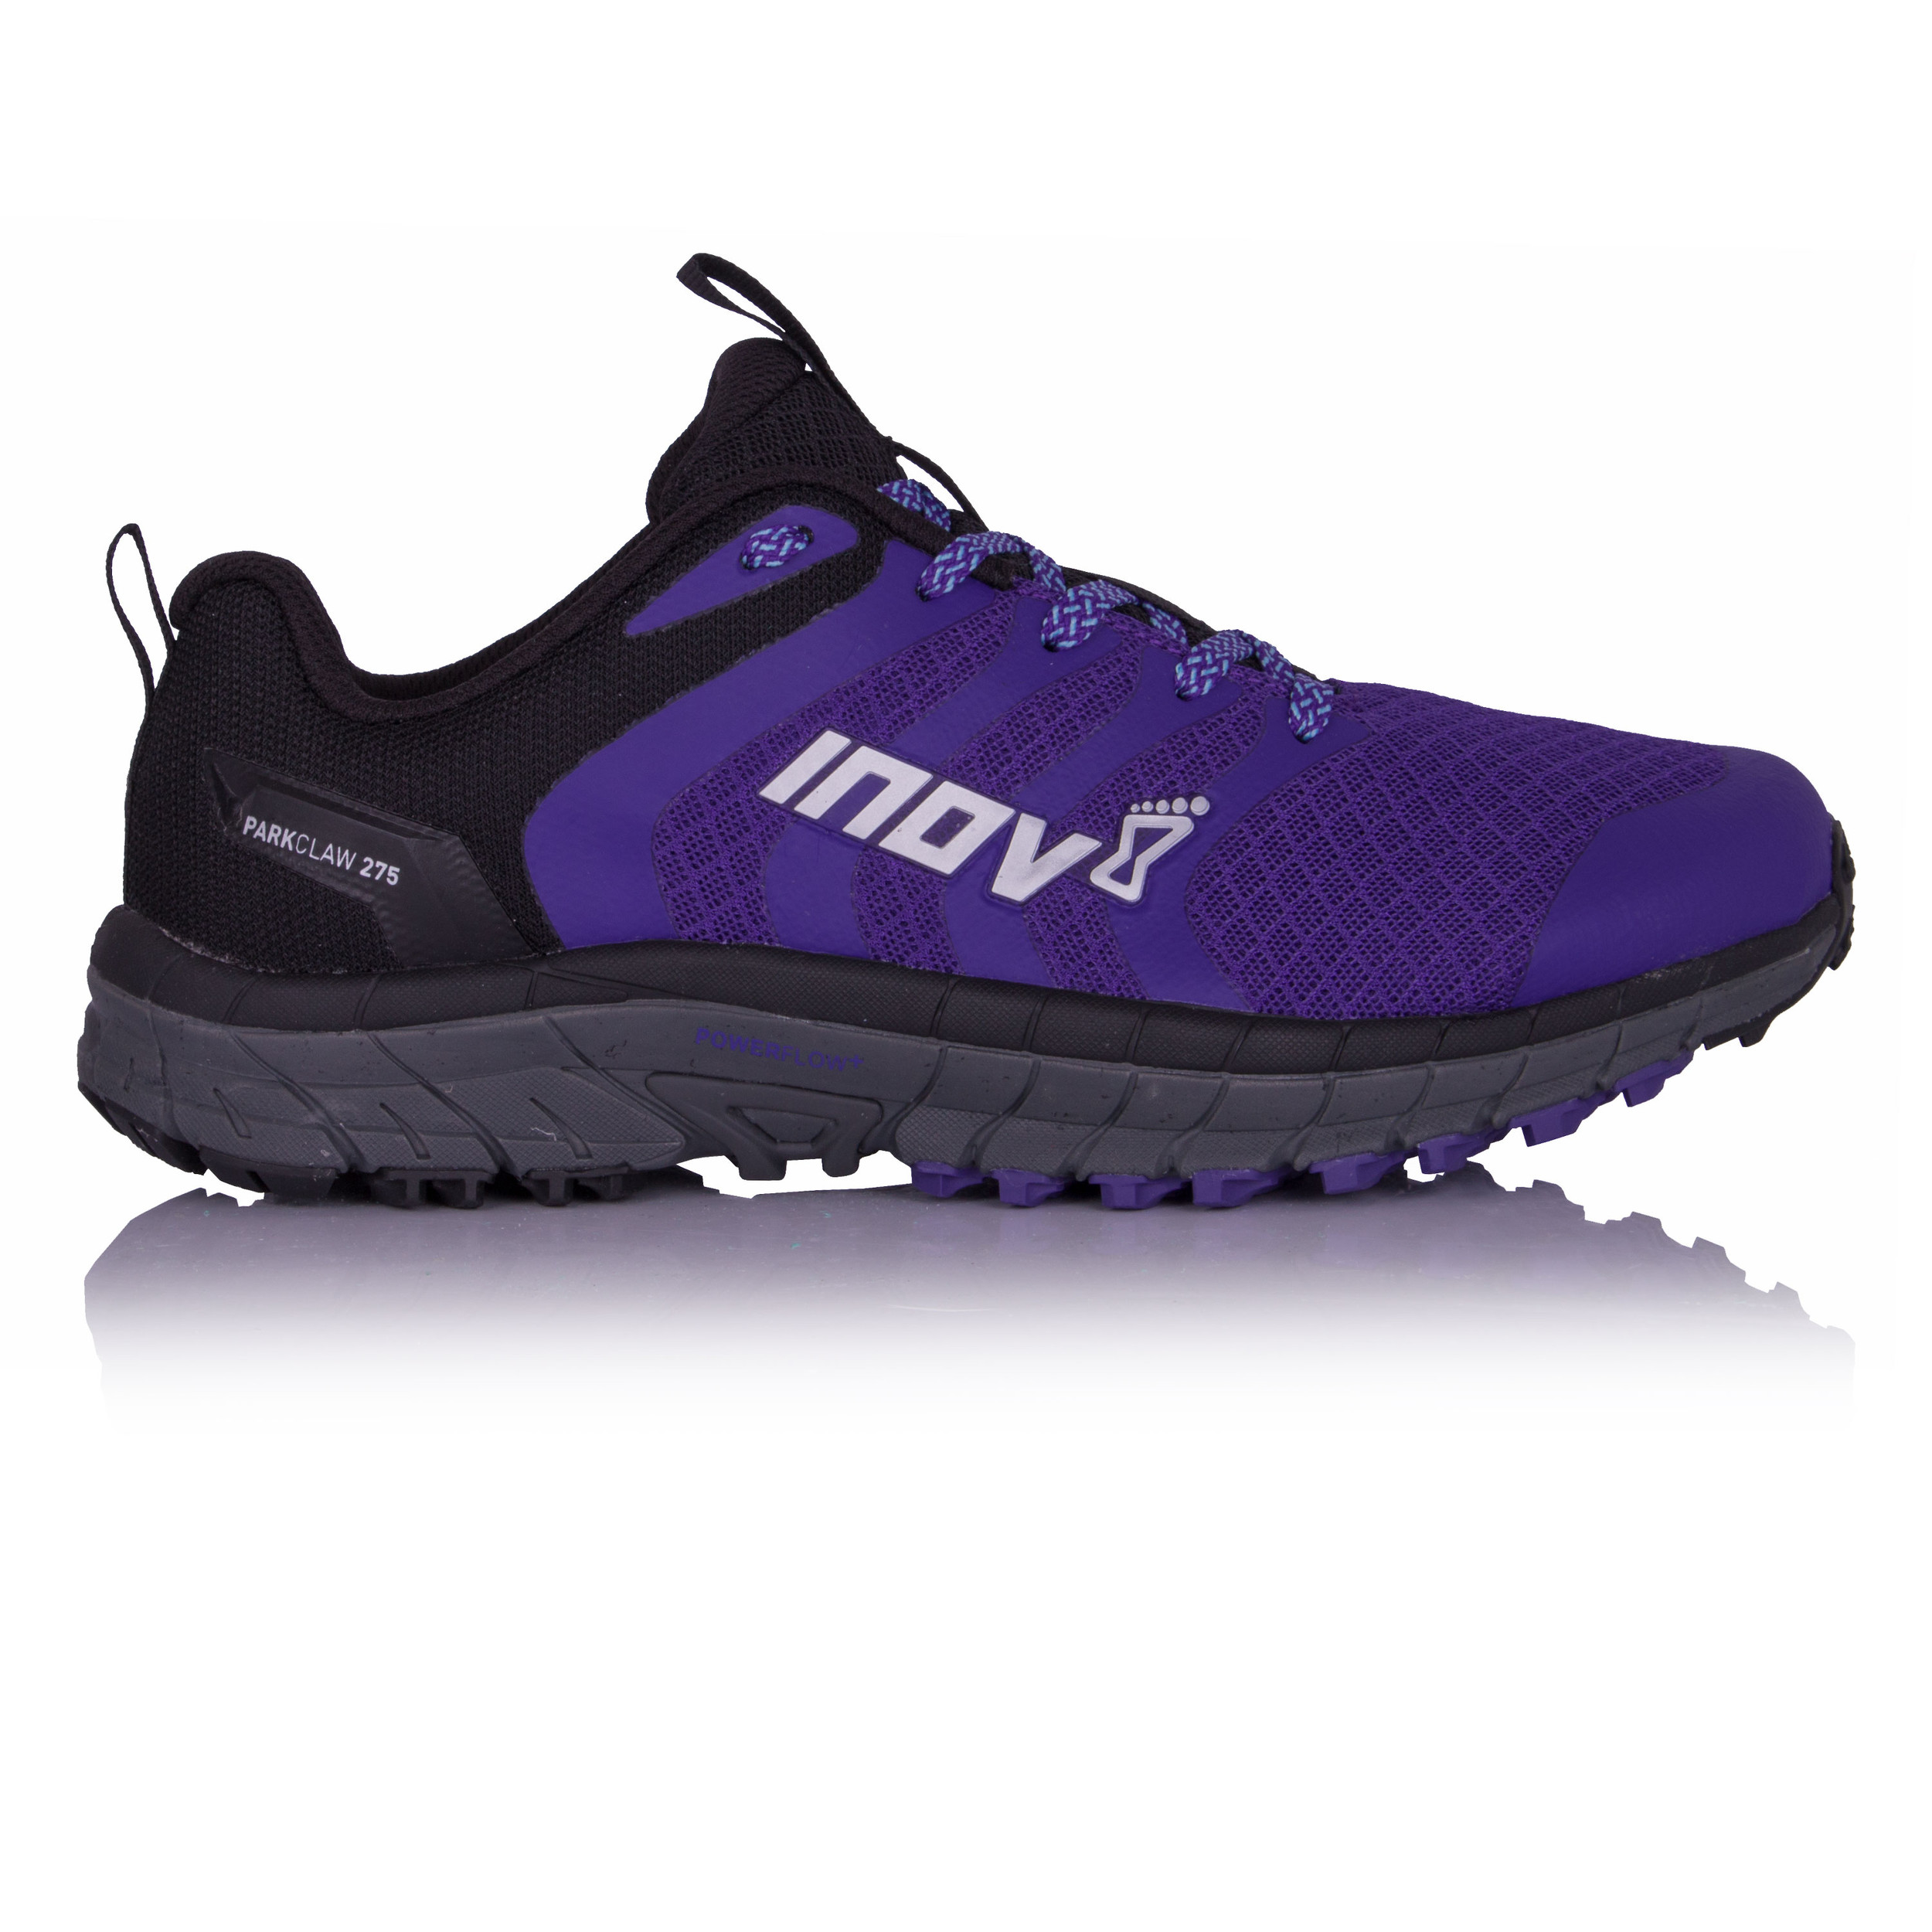 Inov8 Park Claw 275 Women's Running Shoes